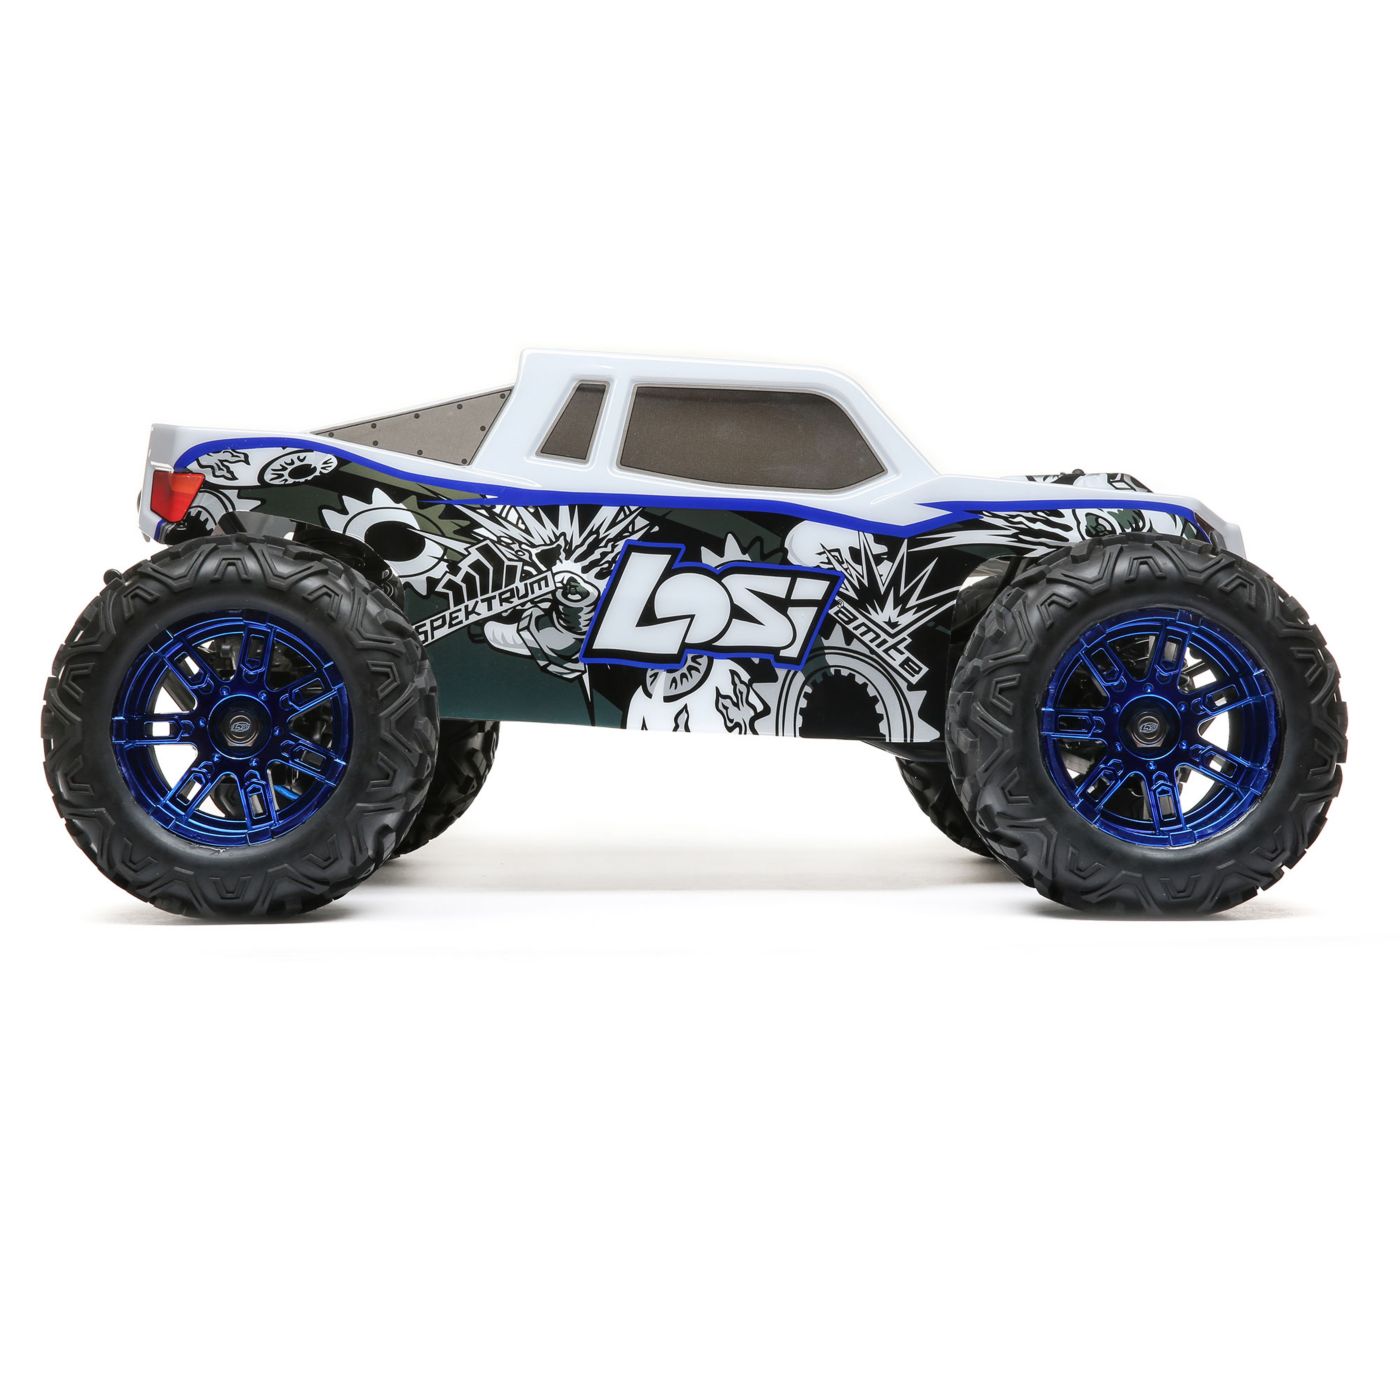 Losi LST 3XL-E RC Monster Truck - Side